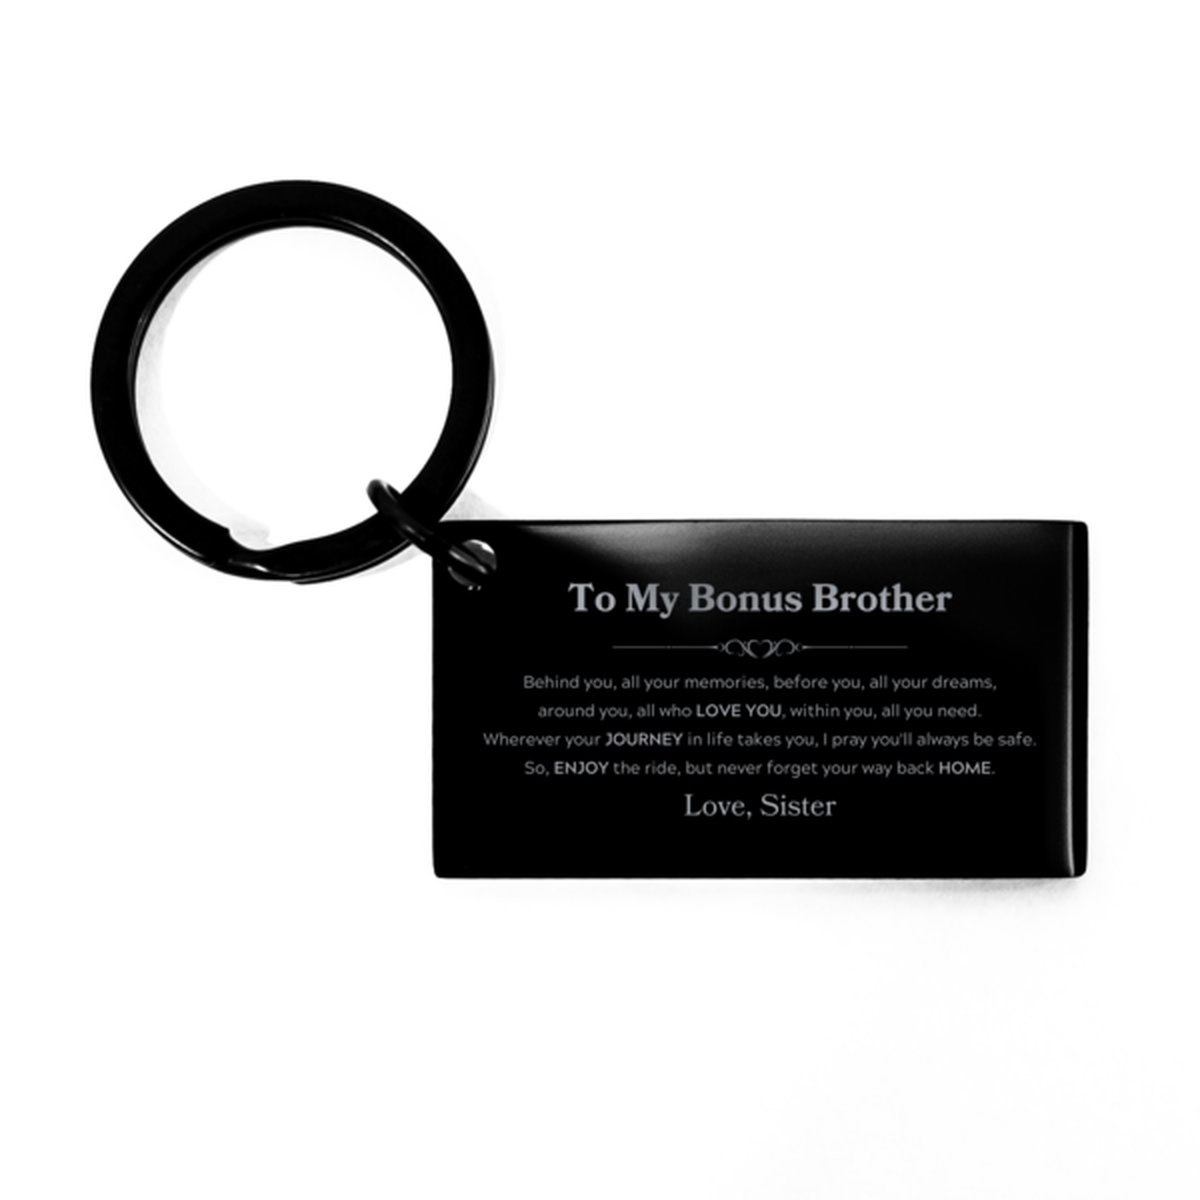 To My Bonus Brother Graduation Gifts from Sister, Bonus Brother Keychain Christmas Birthday Gifts for Bonus Brother Behind you, all your memories, before you, all your dreams. Love, Sister